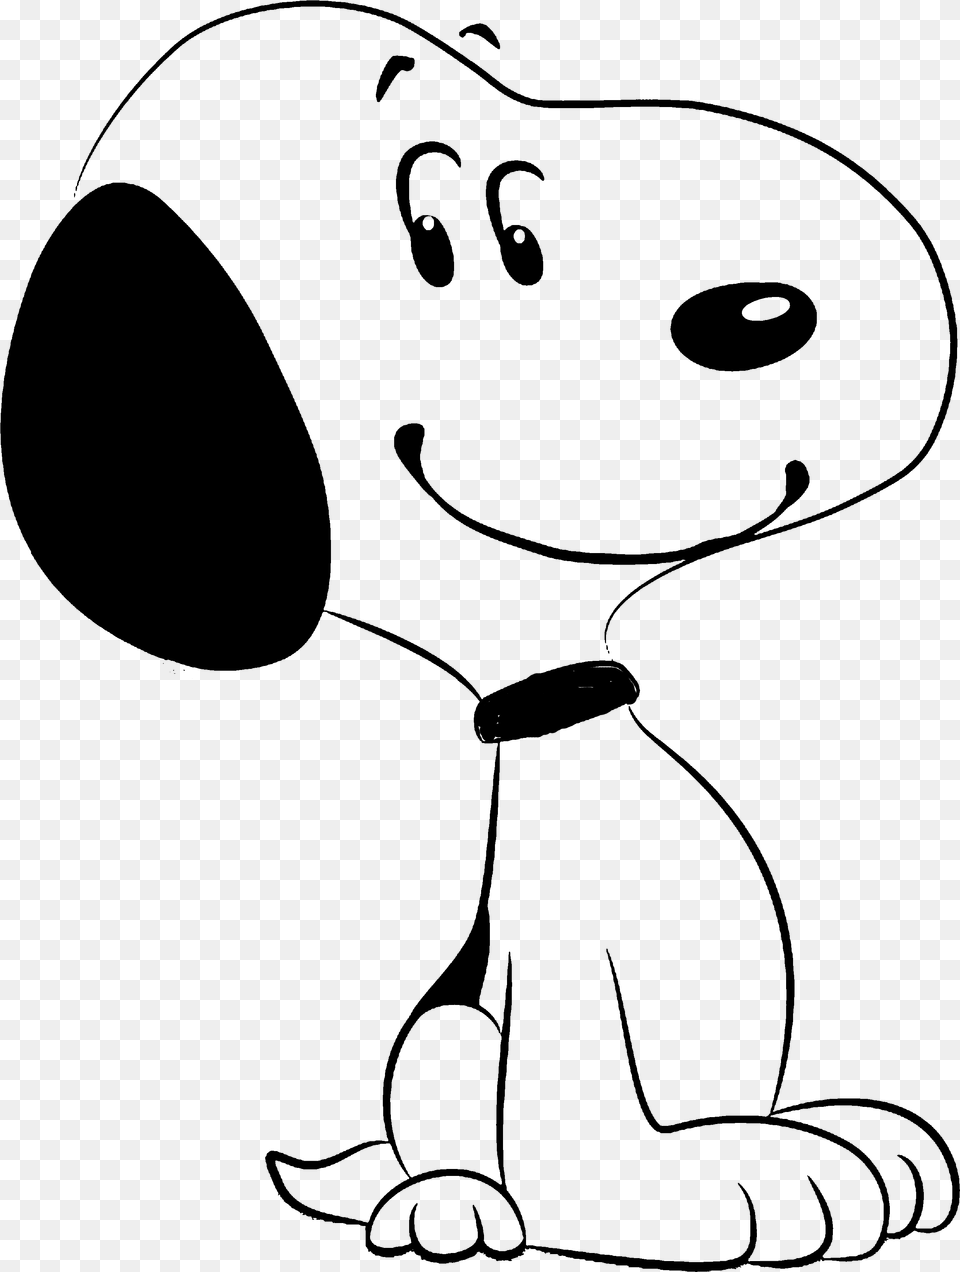 Snoopy Pictures At Getdrawings Snoopy Clipart, Gray Free Transparent Png